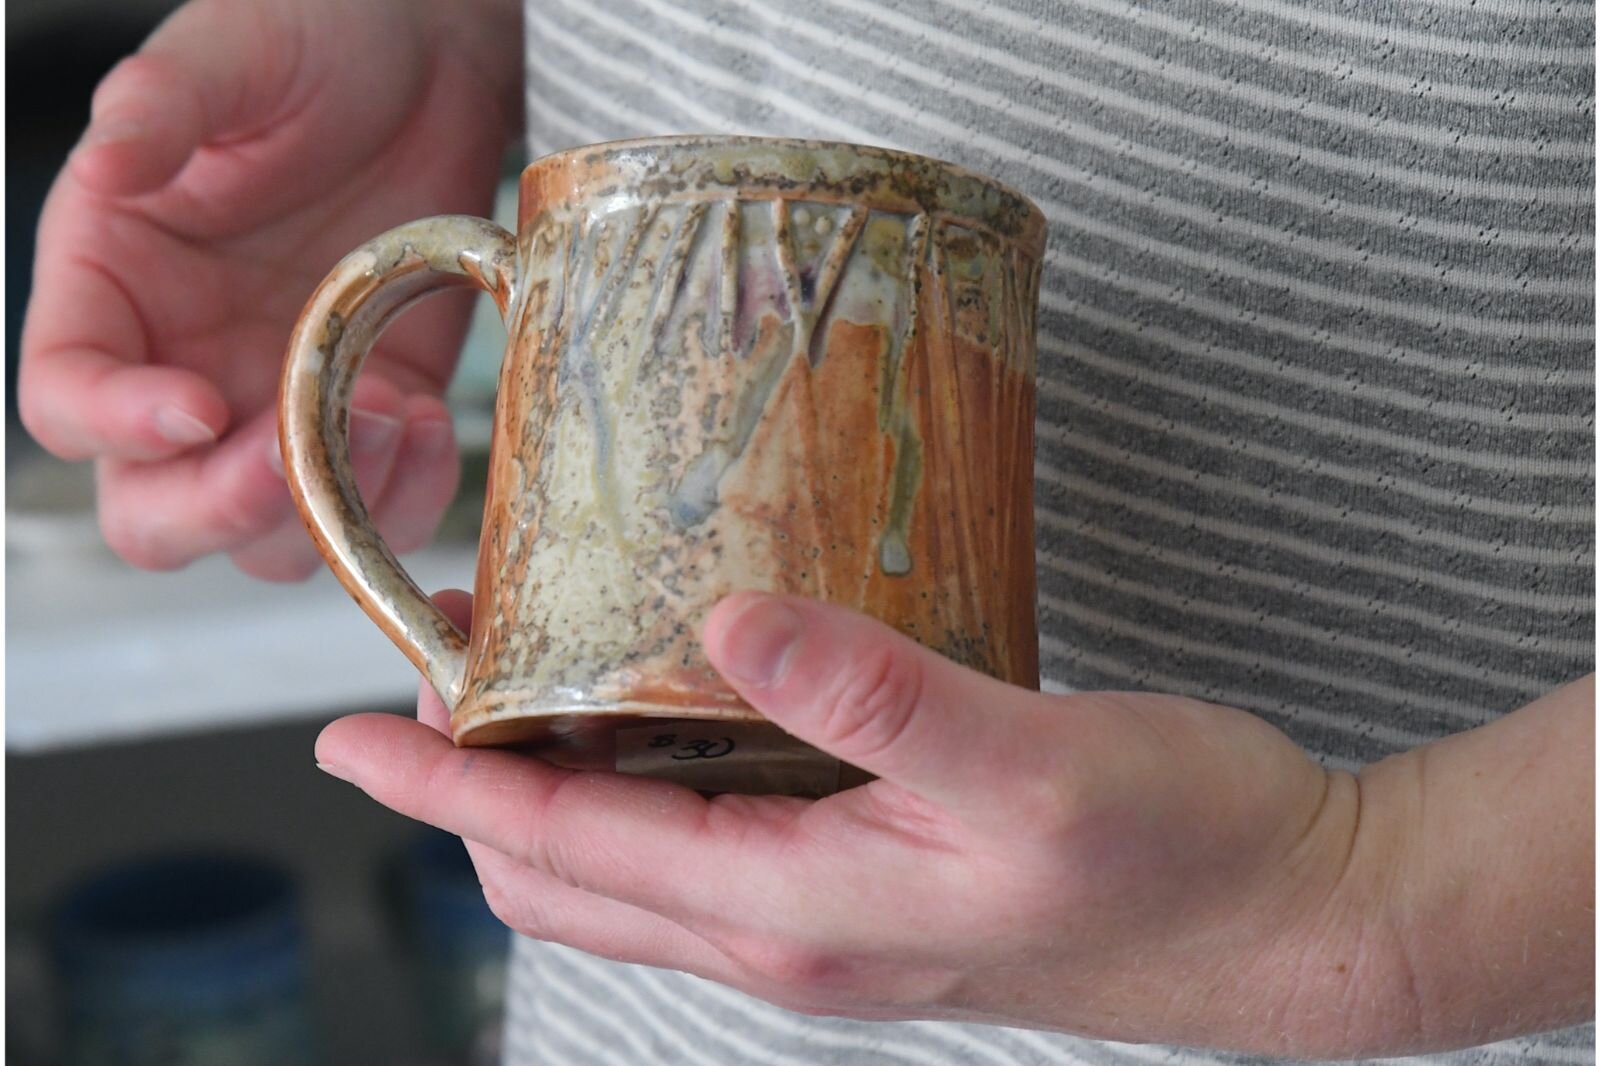 Laura talks about the designs on this mug.